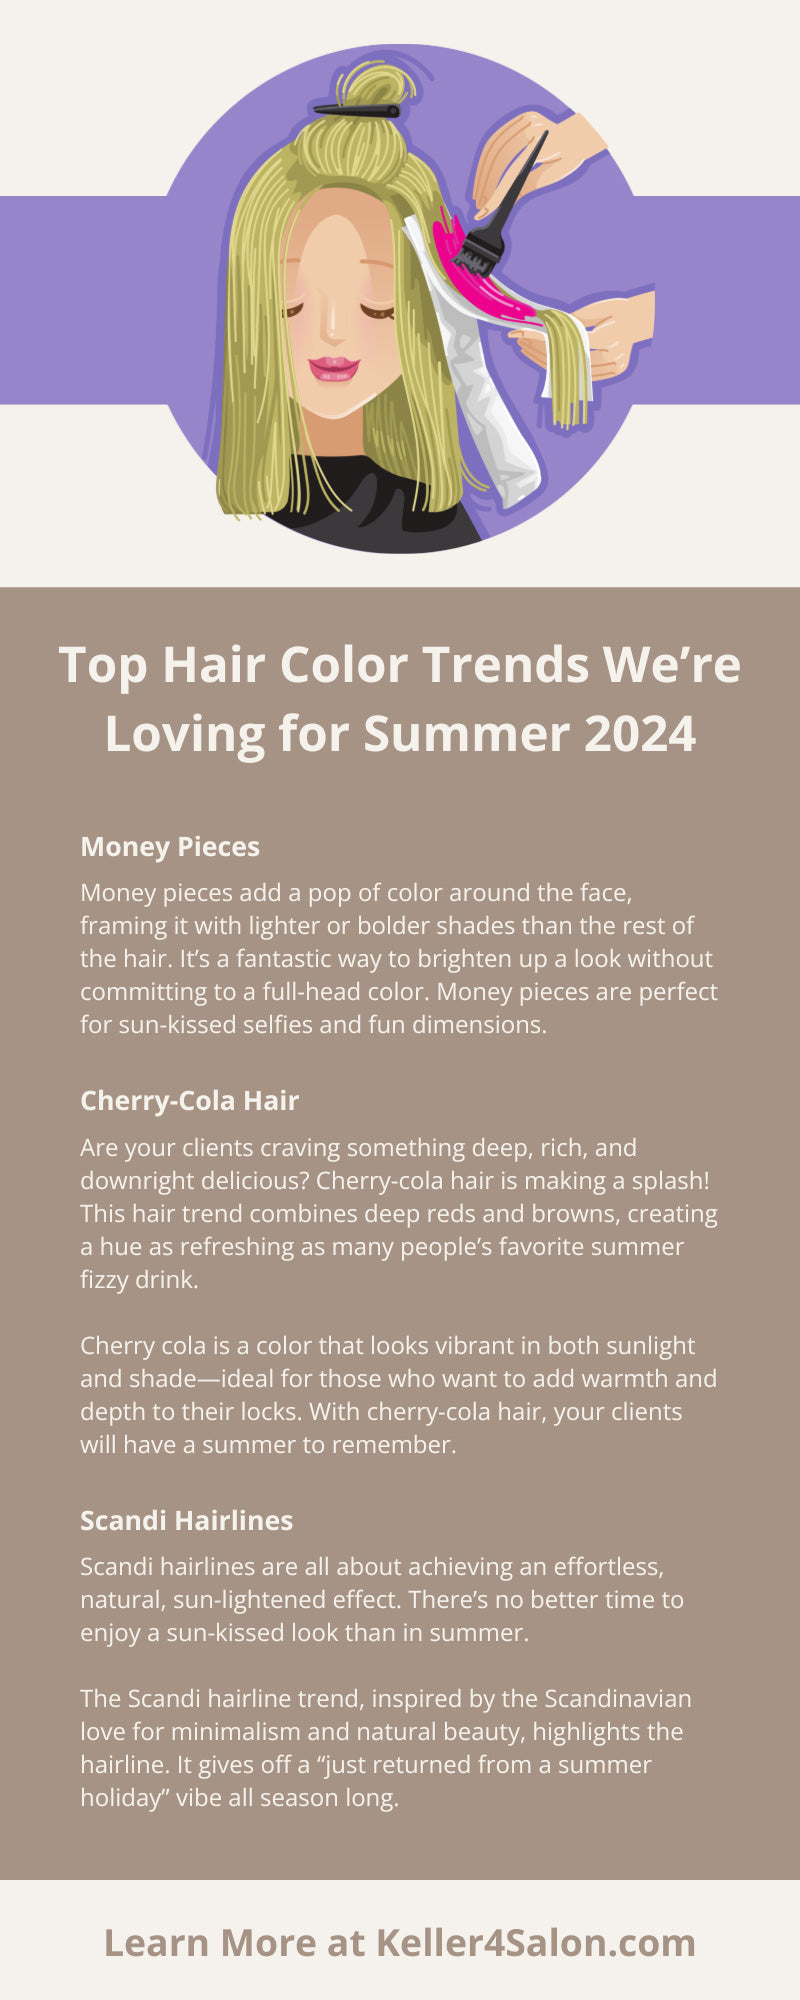 Top Hair Color Trends We’re Loving for Summer 2024